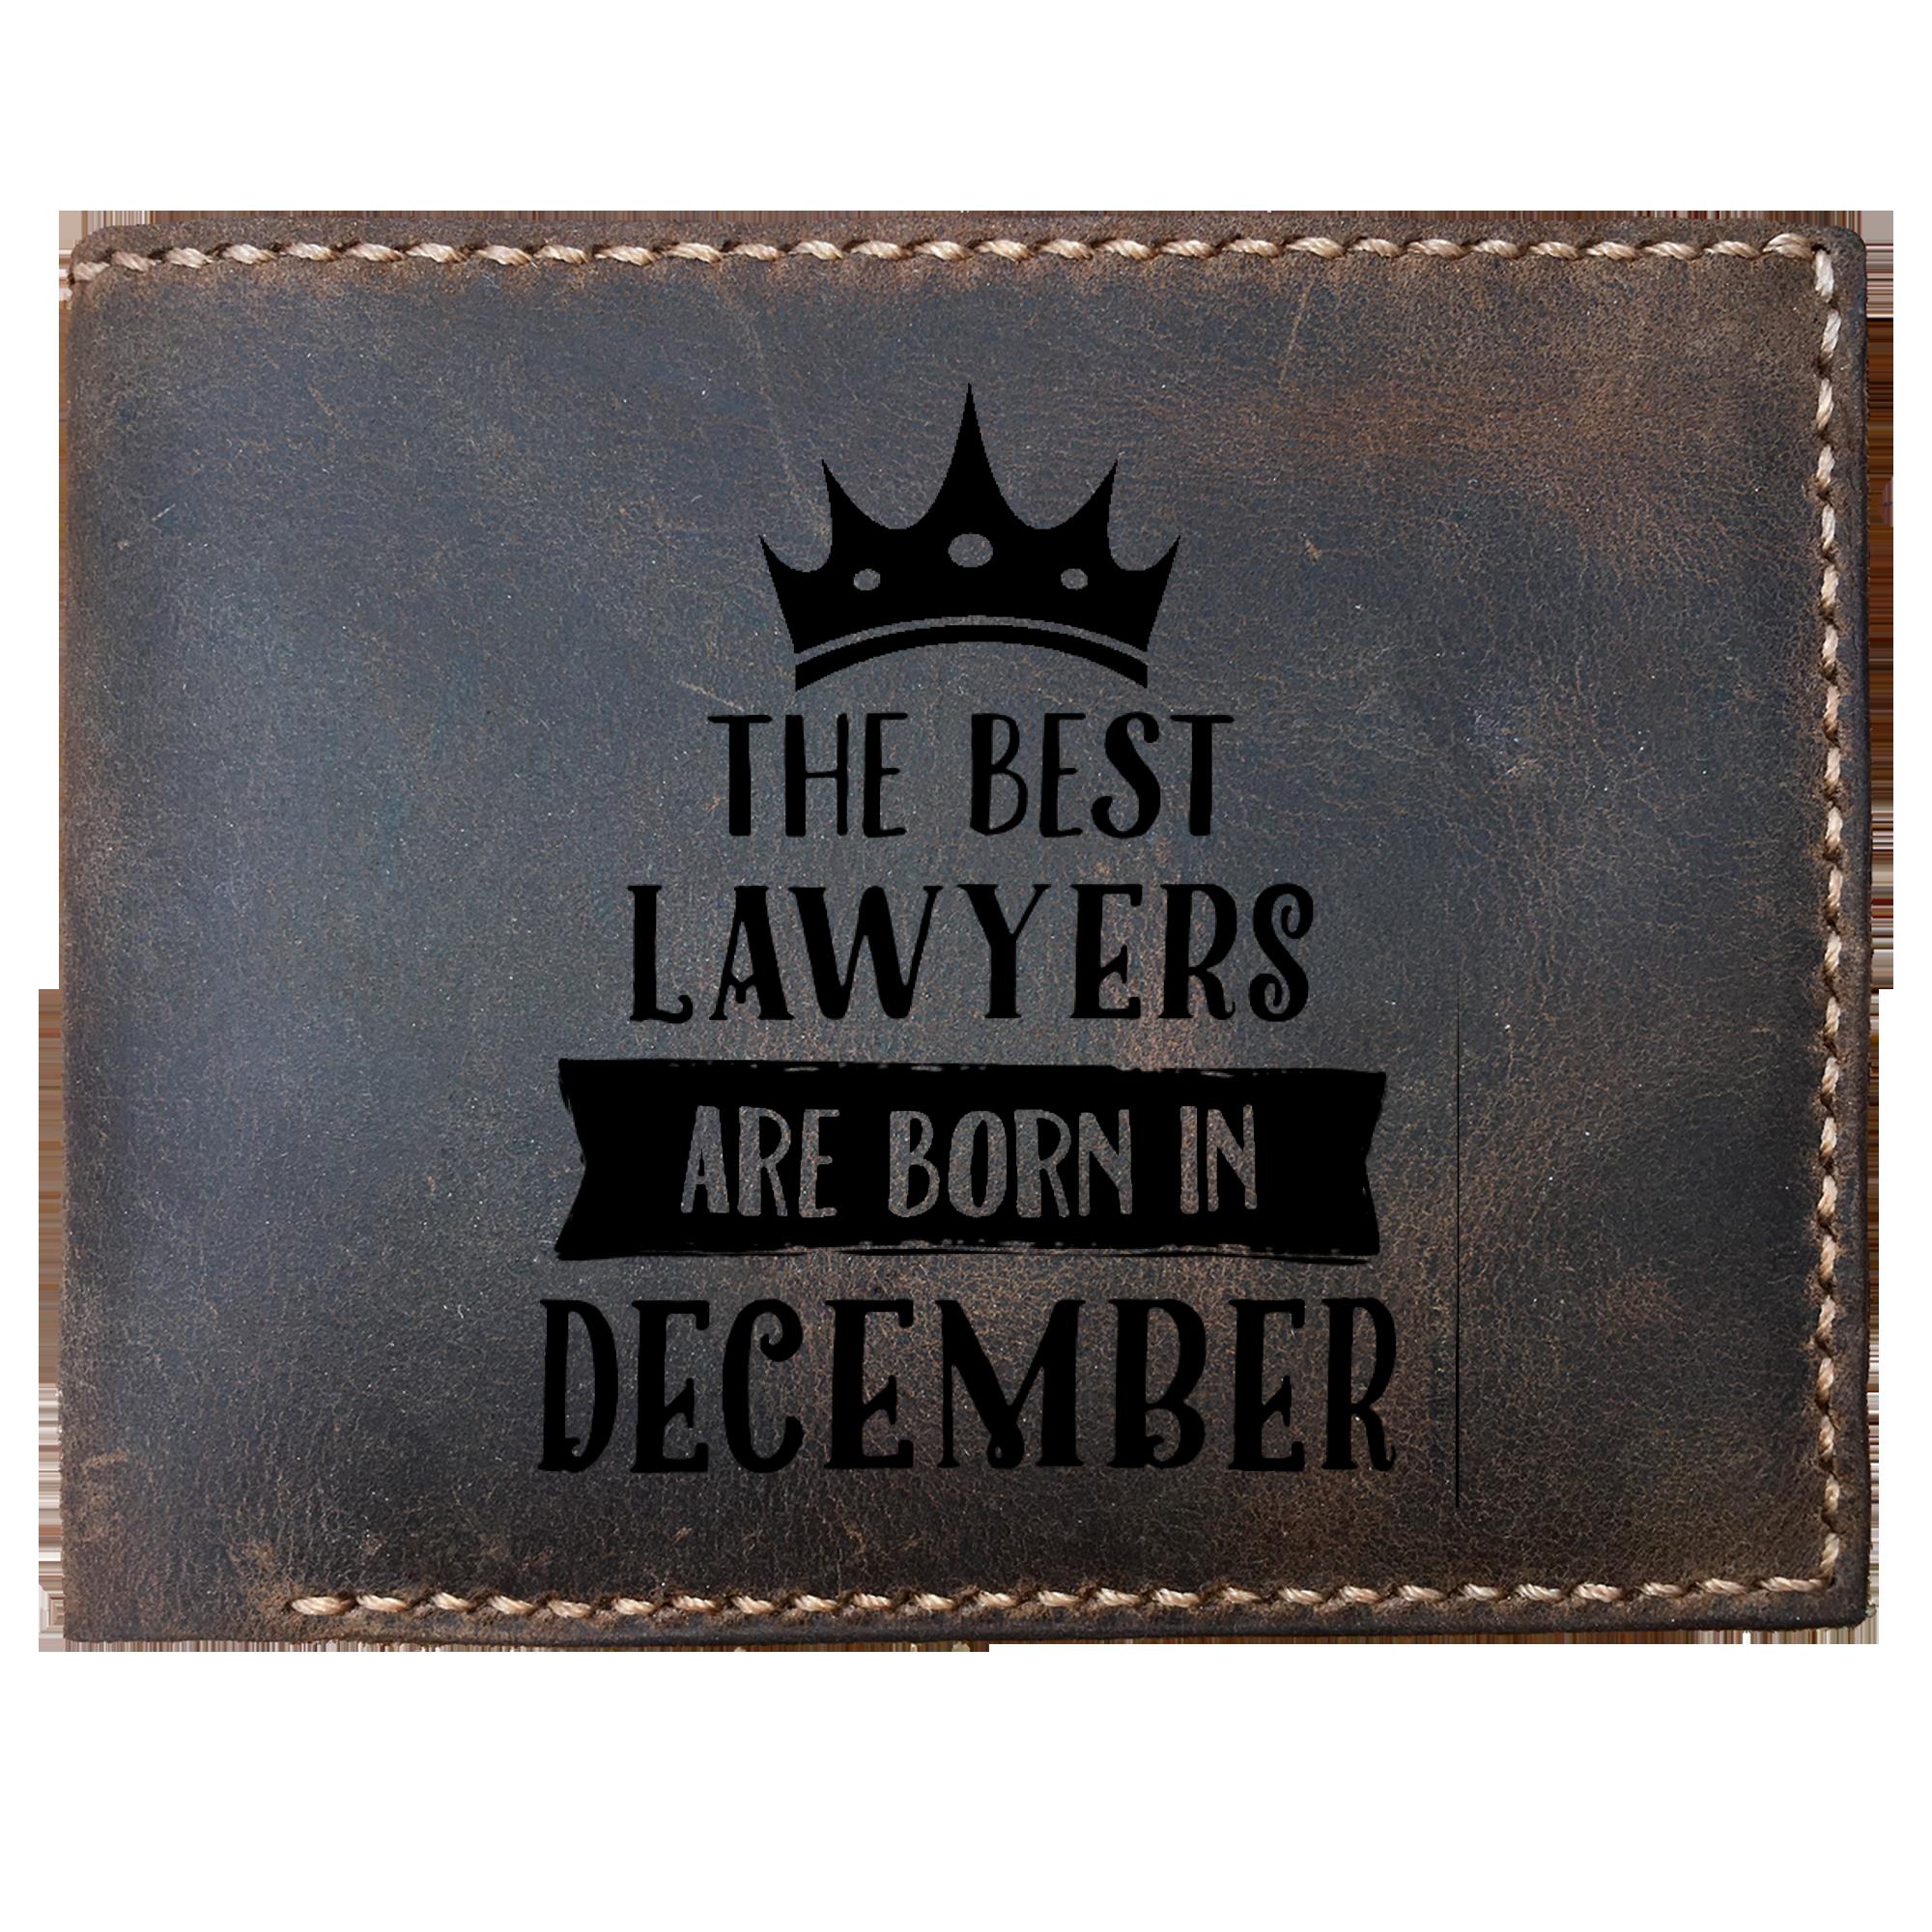 Skitongifts Funny Custom Laser Engraved Bifold Leather Wallet For Men, The Best Lawyers Are Born In Custom Month